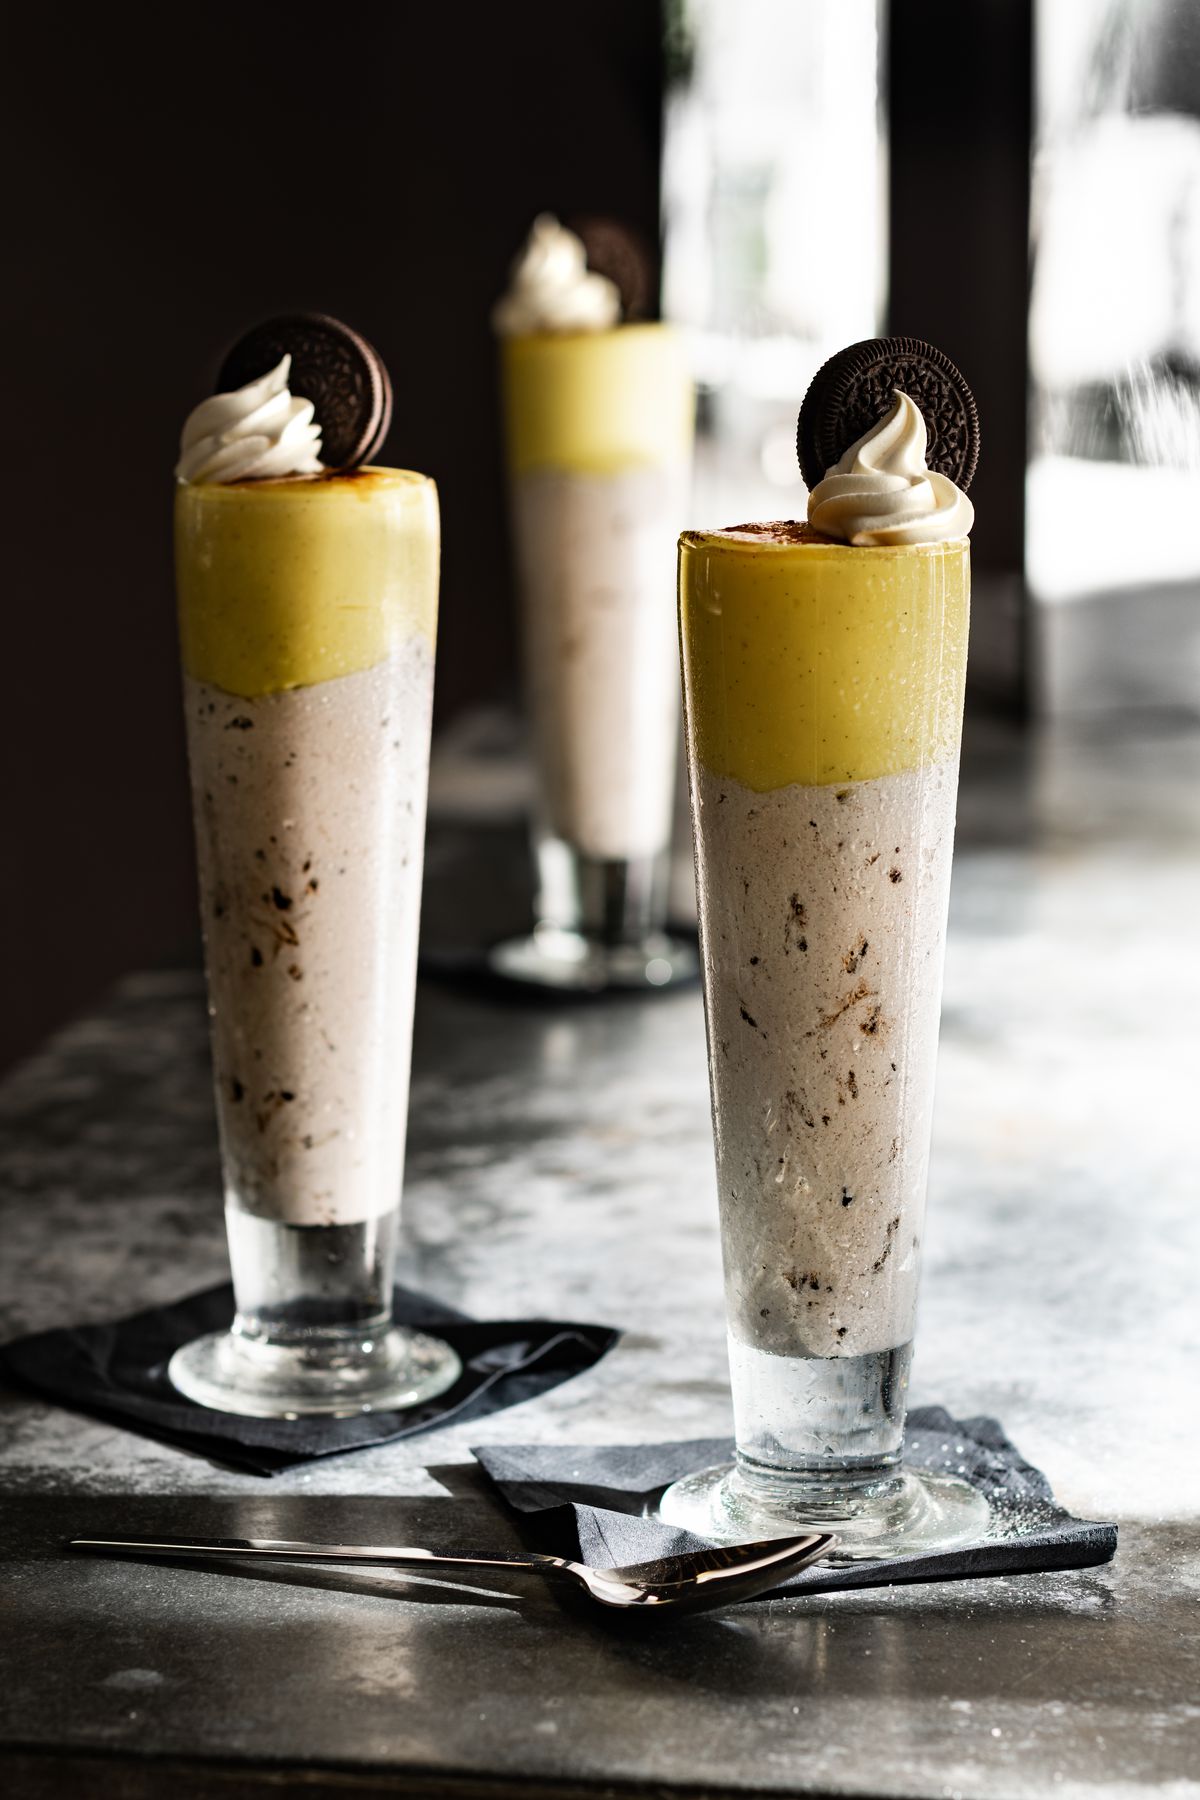 The Oreo Creme Brulee Shake is topped with a layer of crème brûlée and whipped cream.